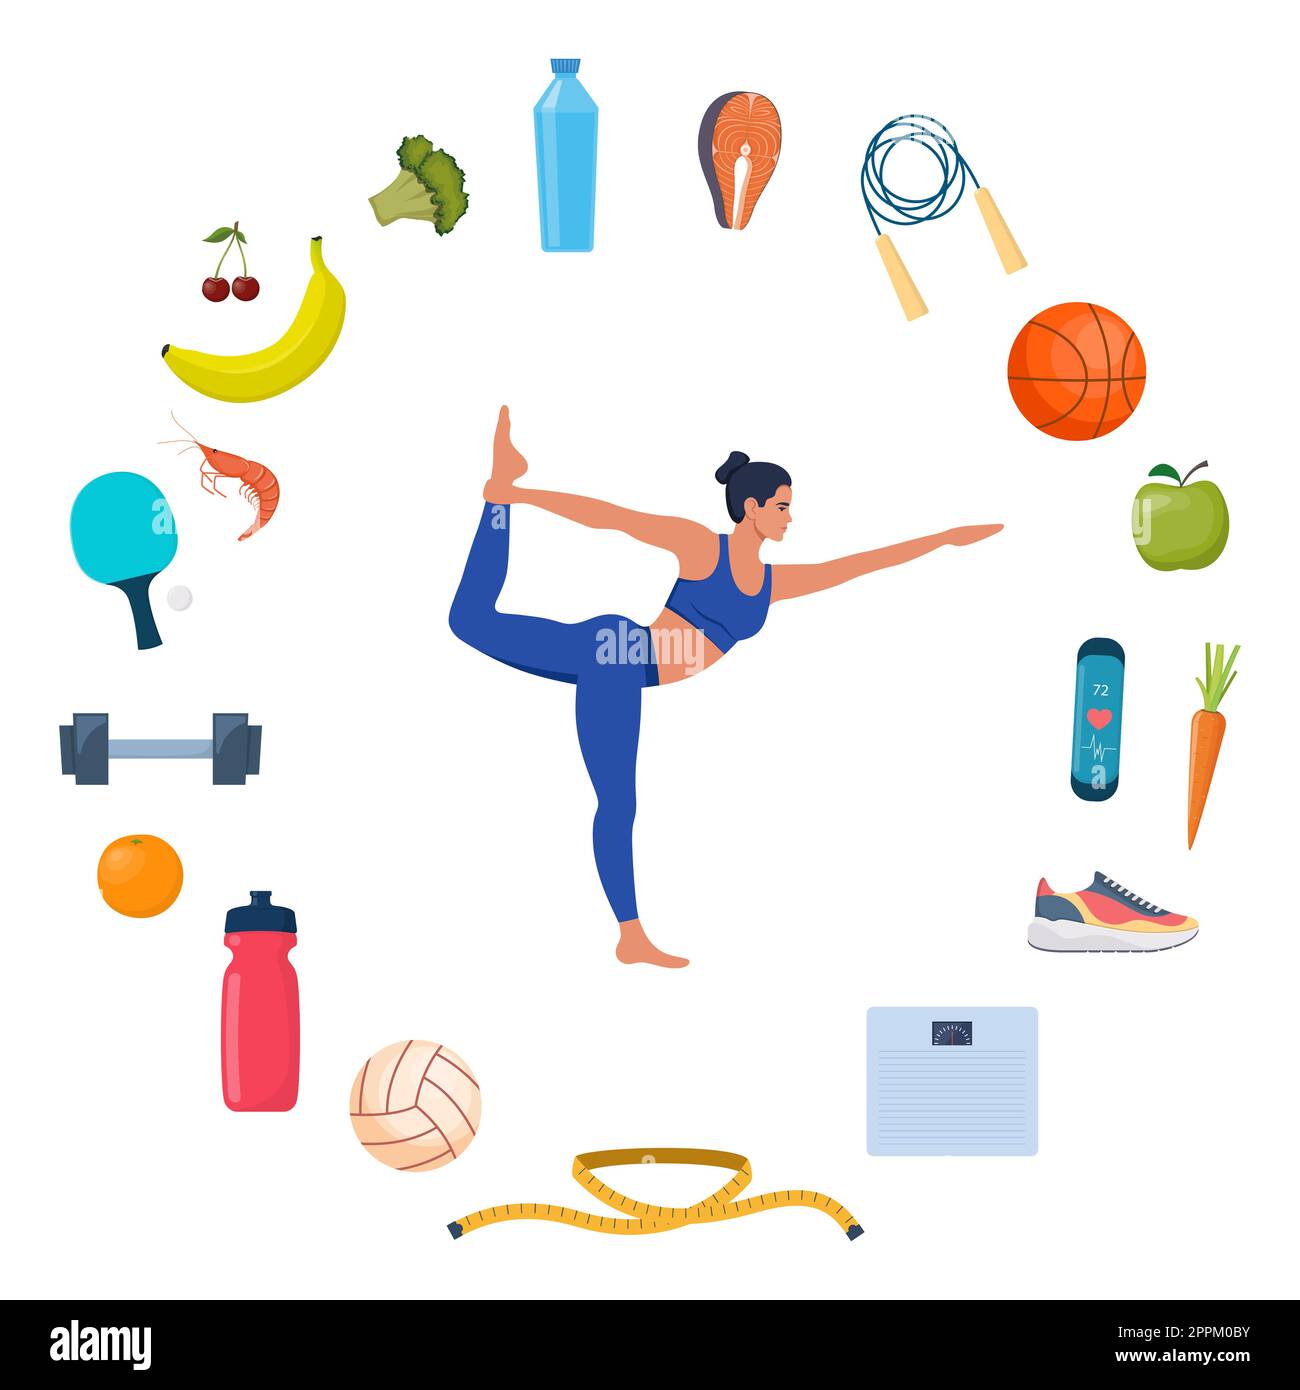 https://c8.alamy.com/comp/2PPM0BY/woman-doing-yoga-exercises-icons-of-healthy-food-vegetables-and-sports-equipment-for-different-sports-around-her-healthy-lifestyle-concept-vector-2PPM0BY.jpg